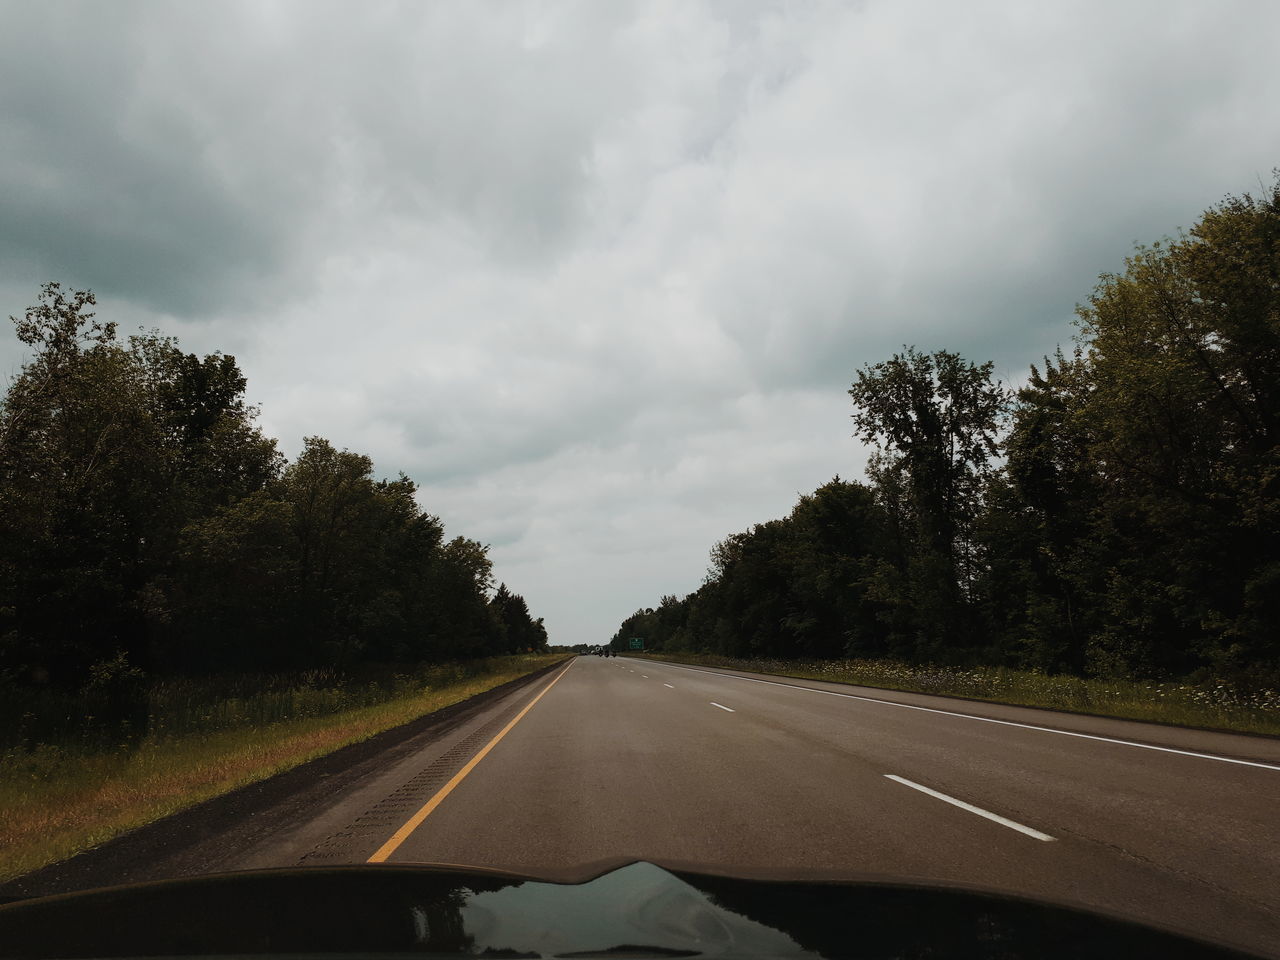 tree, transportation, cloud - sky, road, car, sky, windshield, plant, motor vehicle, land vehicle, vehicle interior, the way forward, transparent, direction, glass - material, mode of transportation, car interior, diminishing perspective, sign, no people, car point of view, road trip, outdoors, dividing line